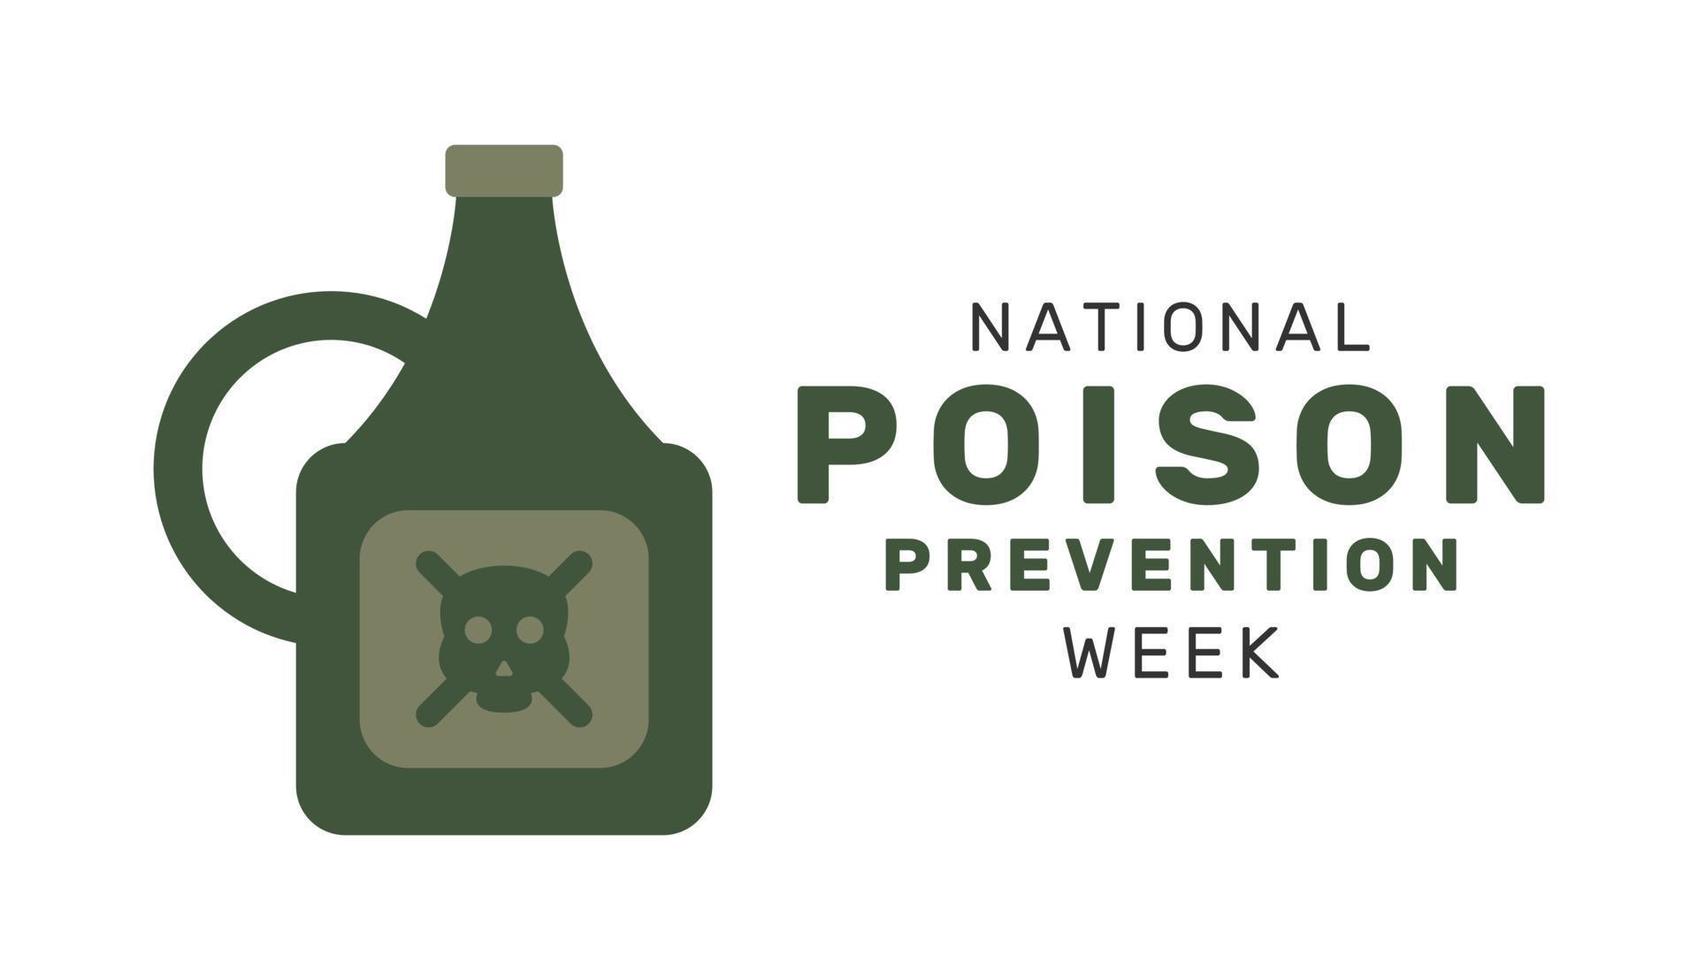 Vector illustration of National Poison prevention week NPPW. Observed every year in March